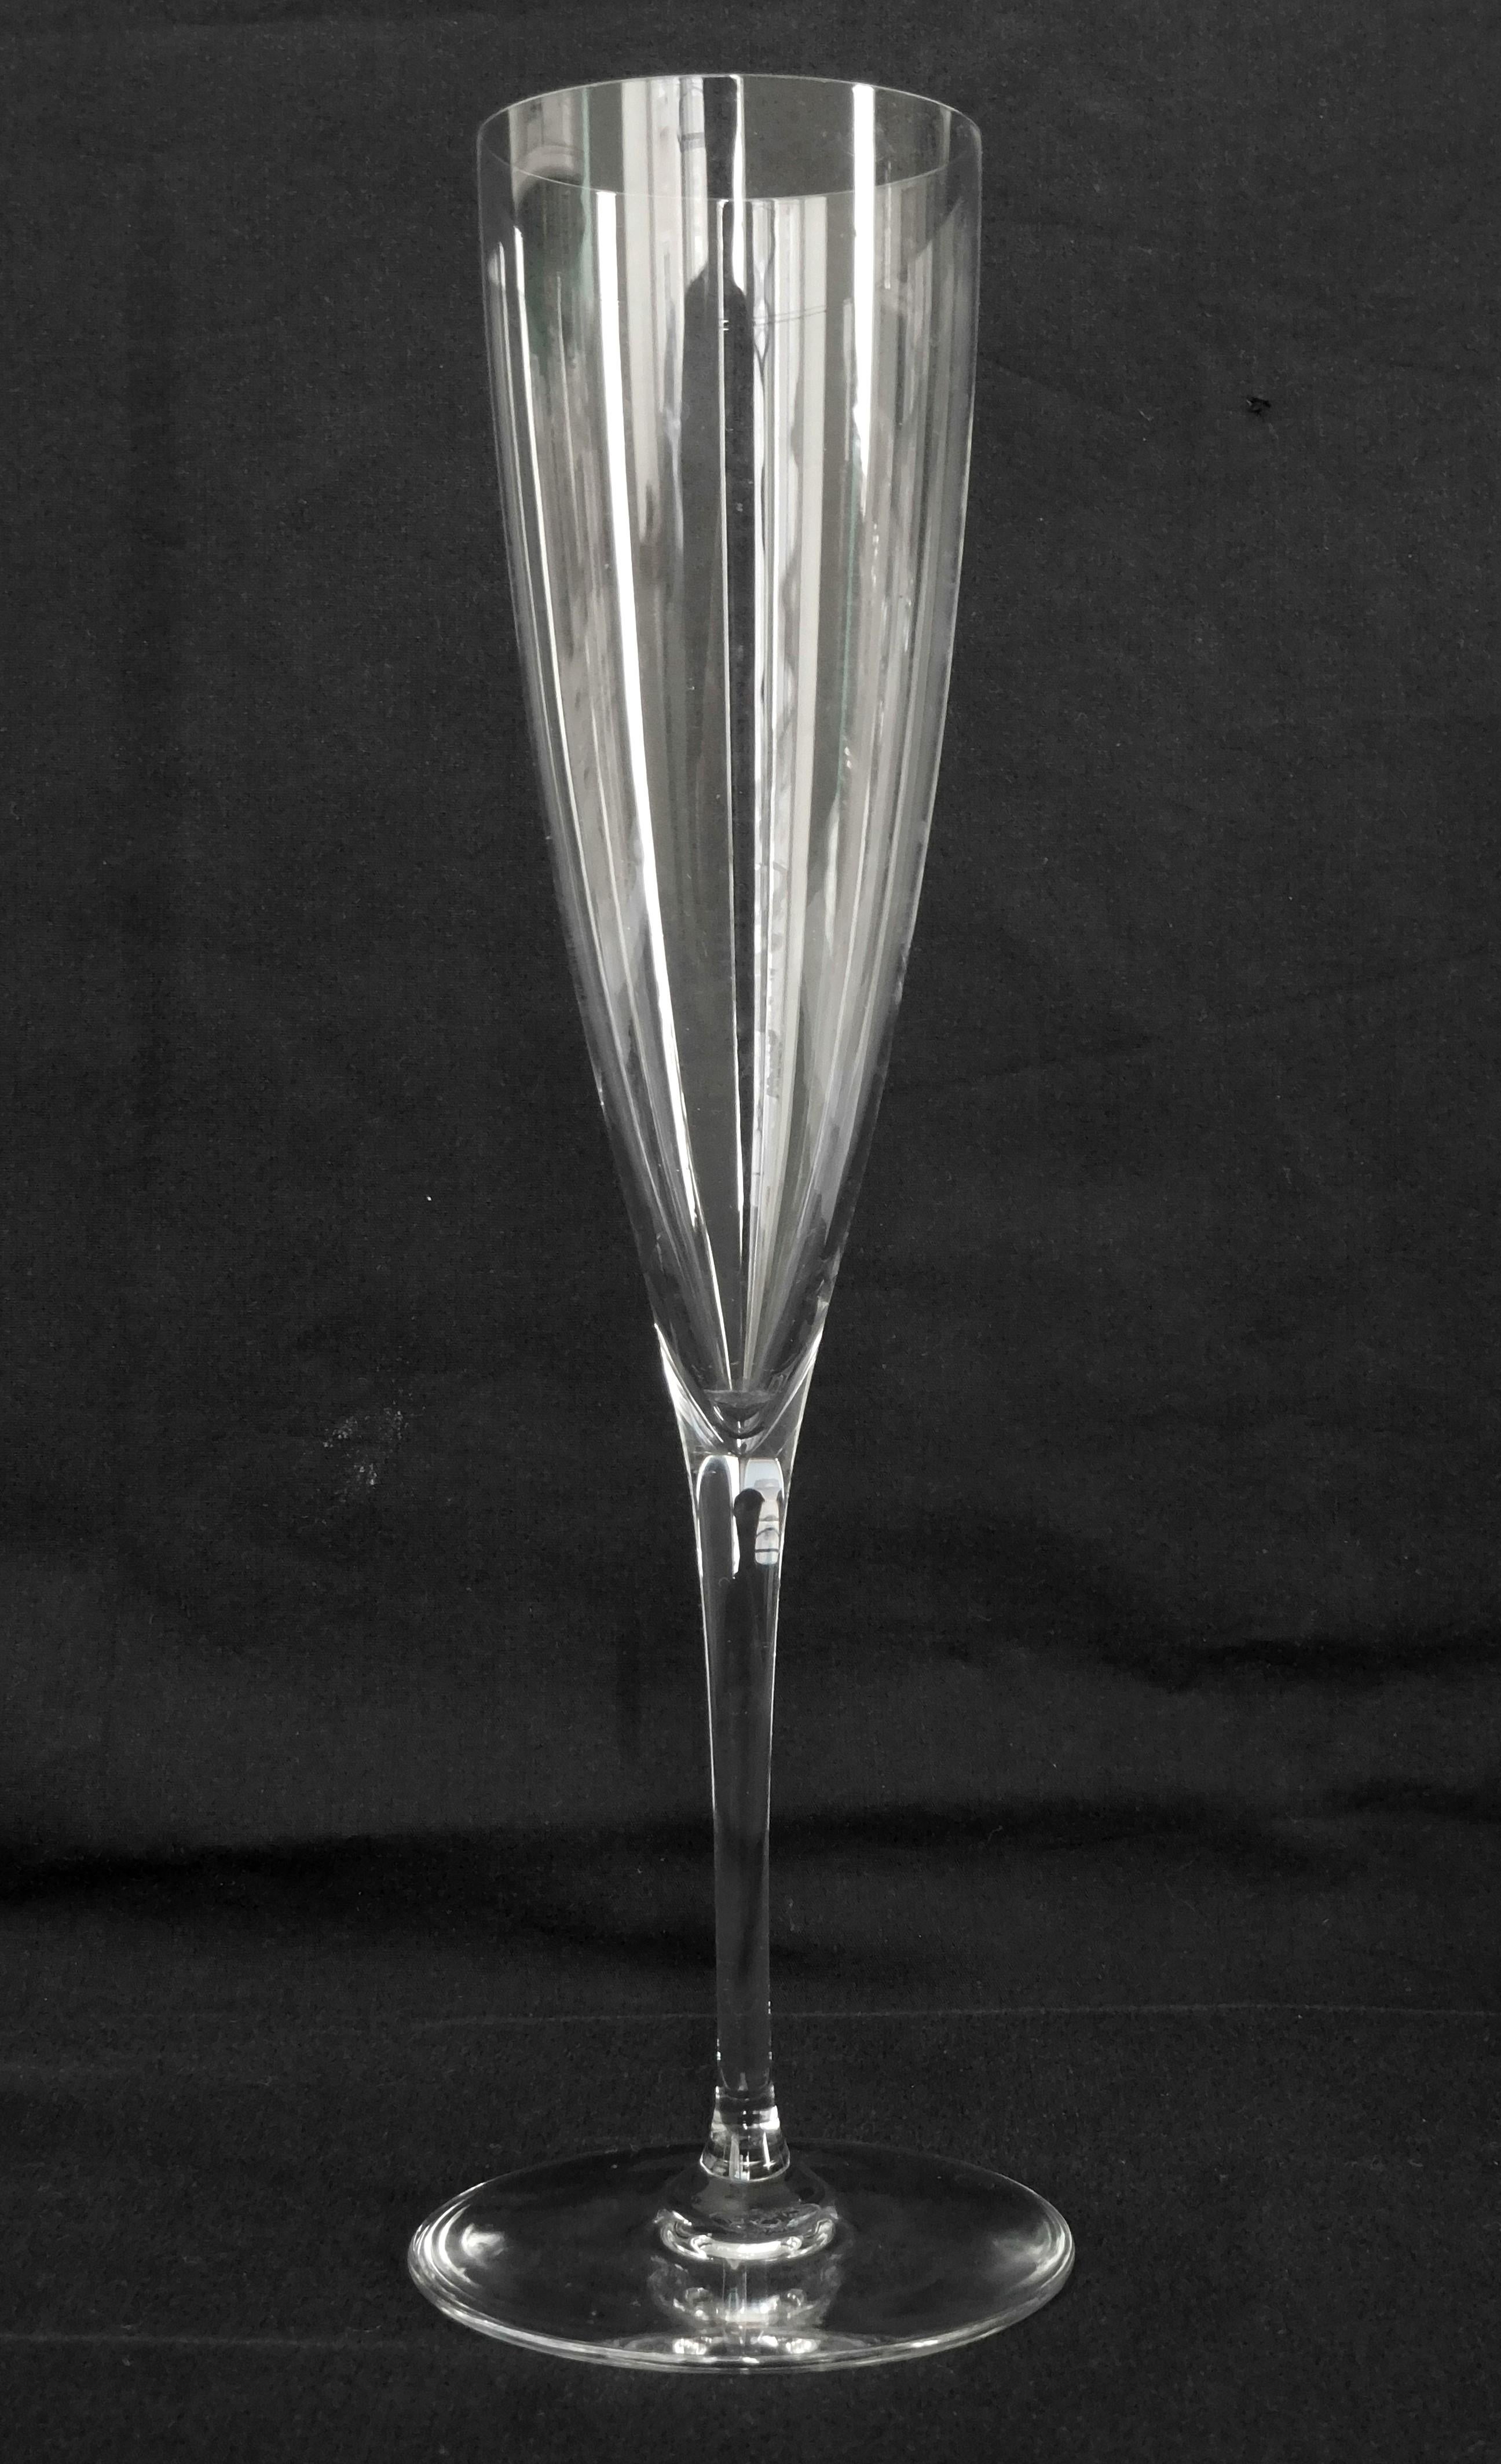 French 6 Baccarat crystal champagne flutes - Dom Perignon pattern - signed